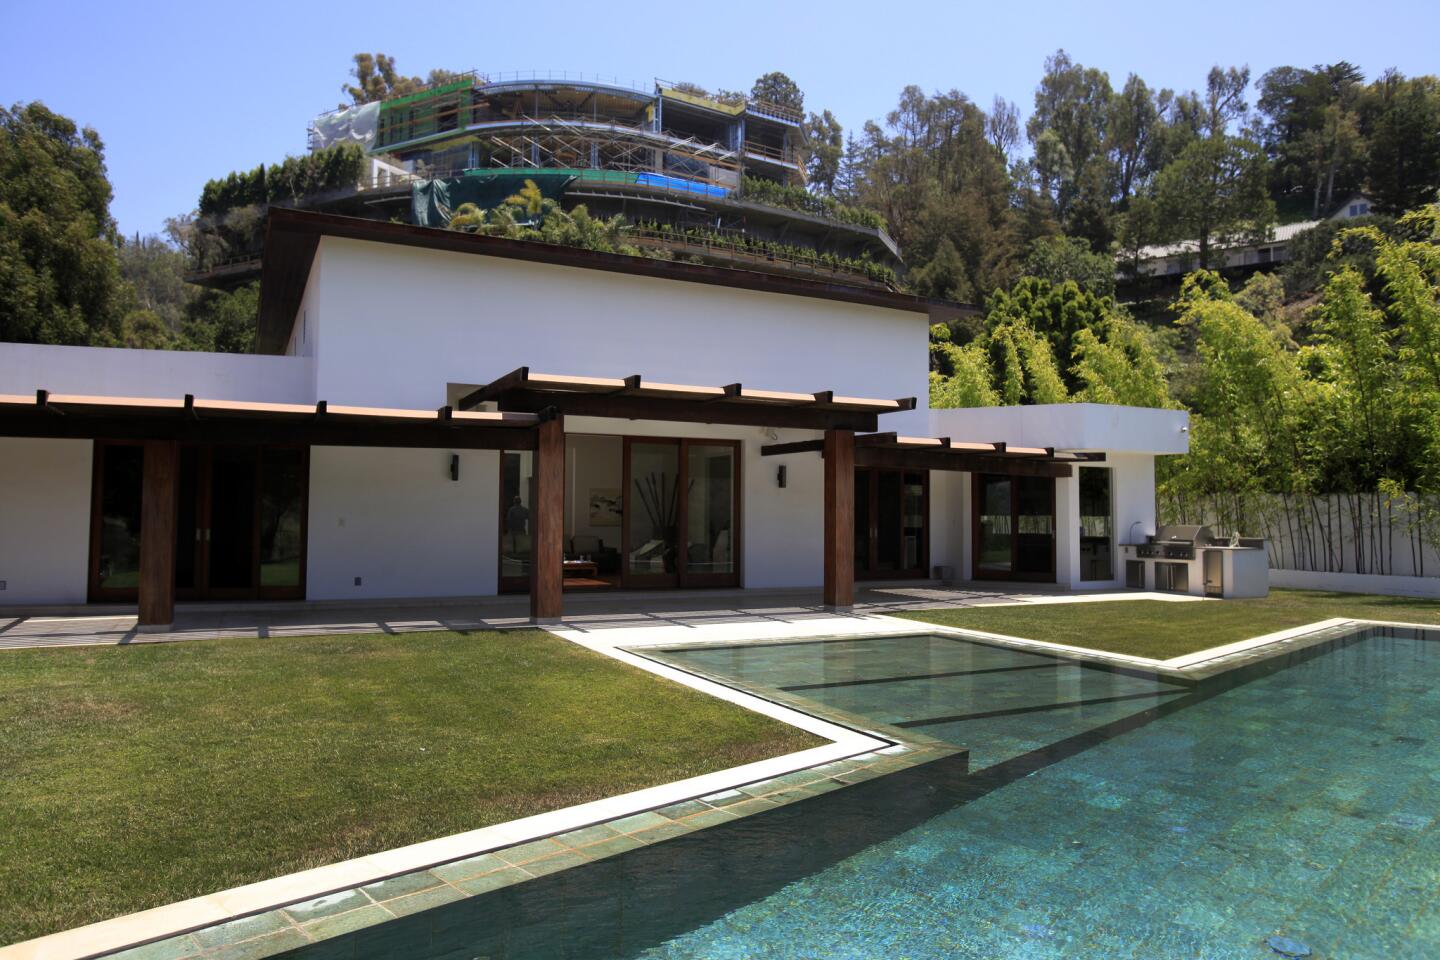 A Balinese-inspired contemporary home owned by Joseph Horacek III is overshadowed by a mammoth house under construction above it. City officials have pulled the construction permits. (Francine Orr, Los Angeles Times)